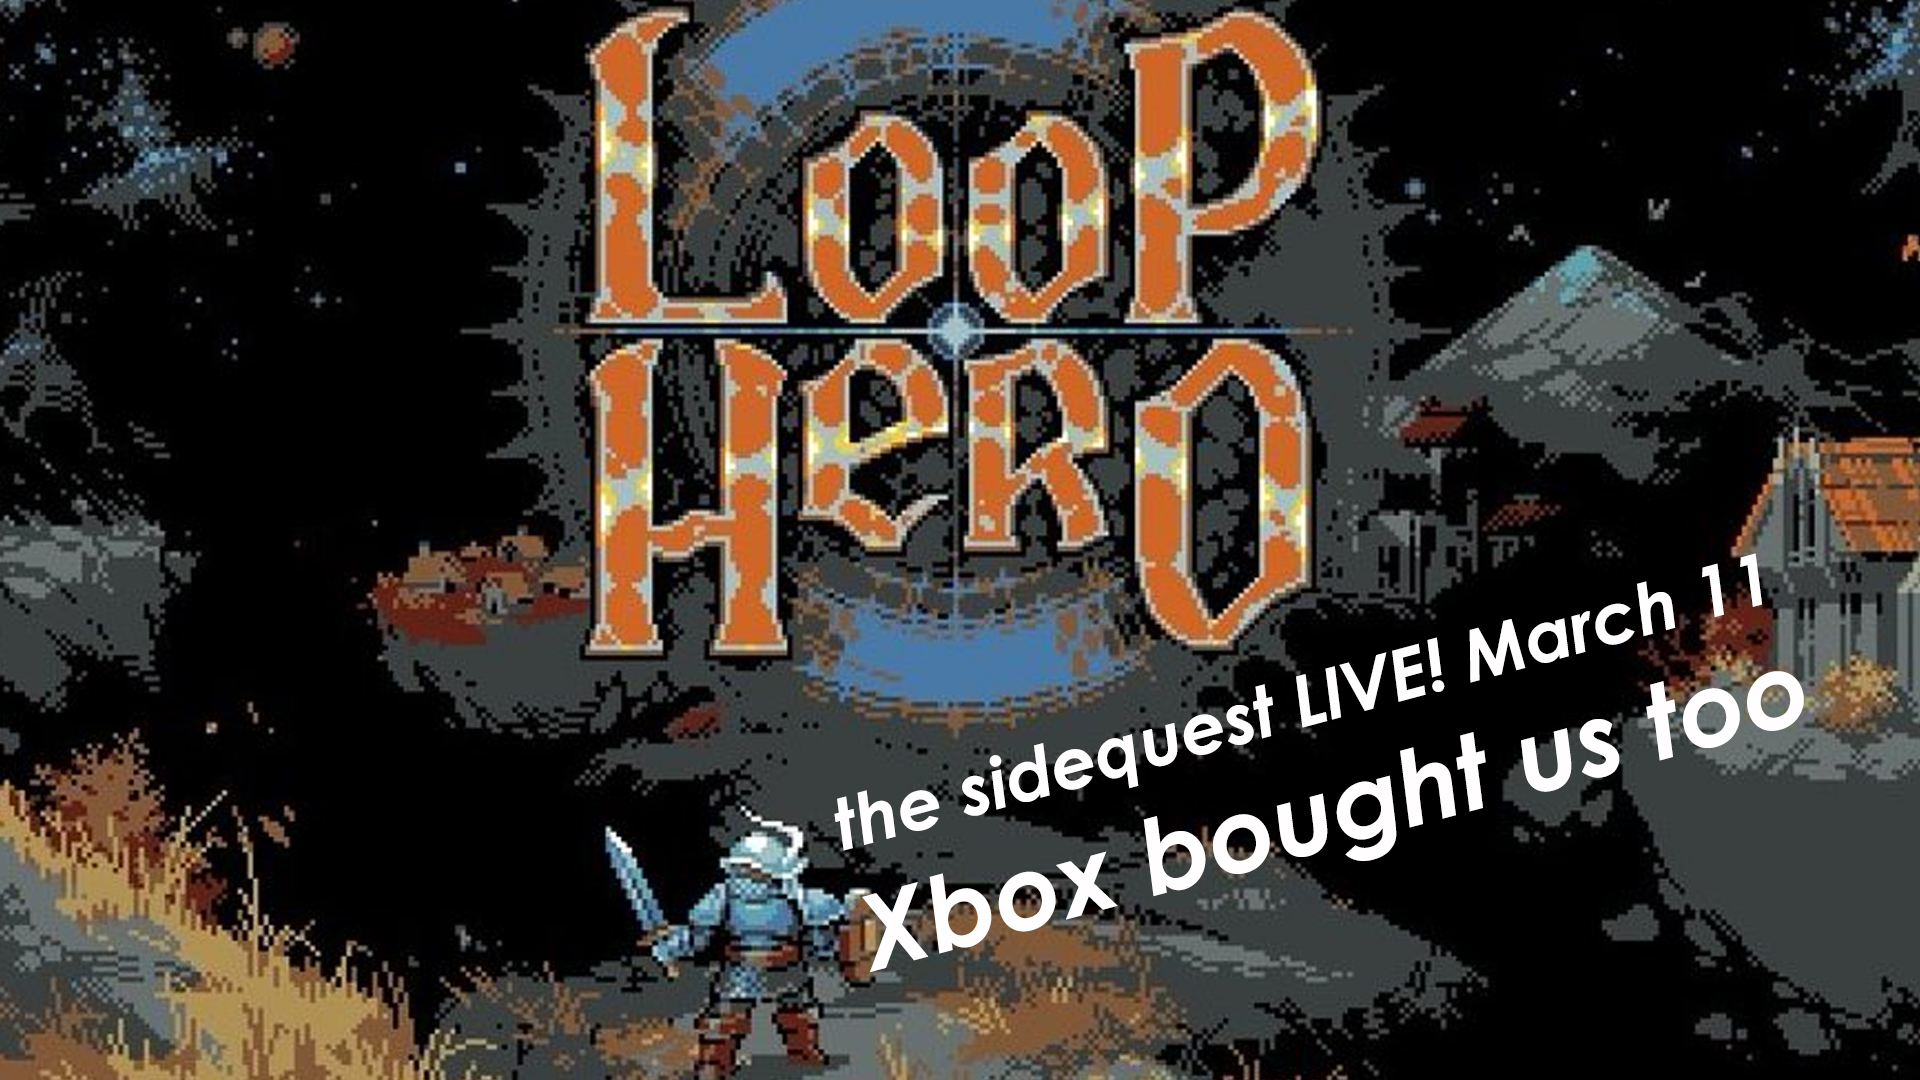 The SideQuest LIVE! March 11, 2021: Xbox bought us too